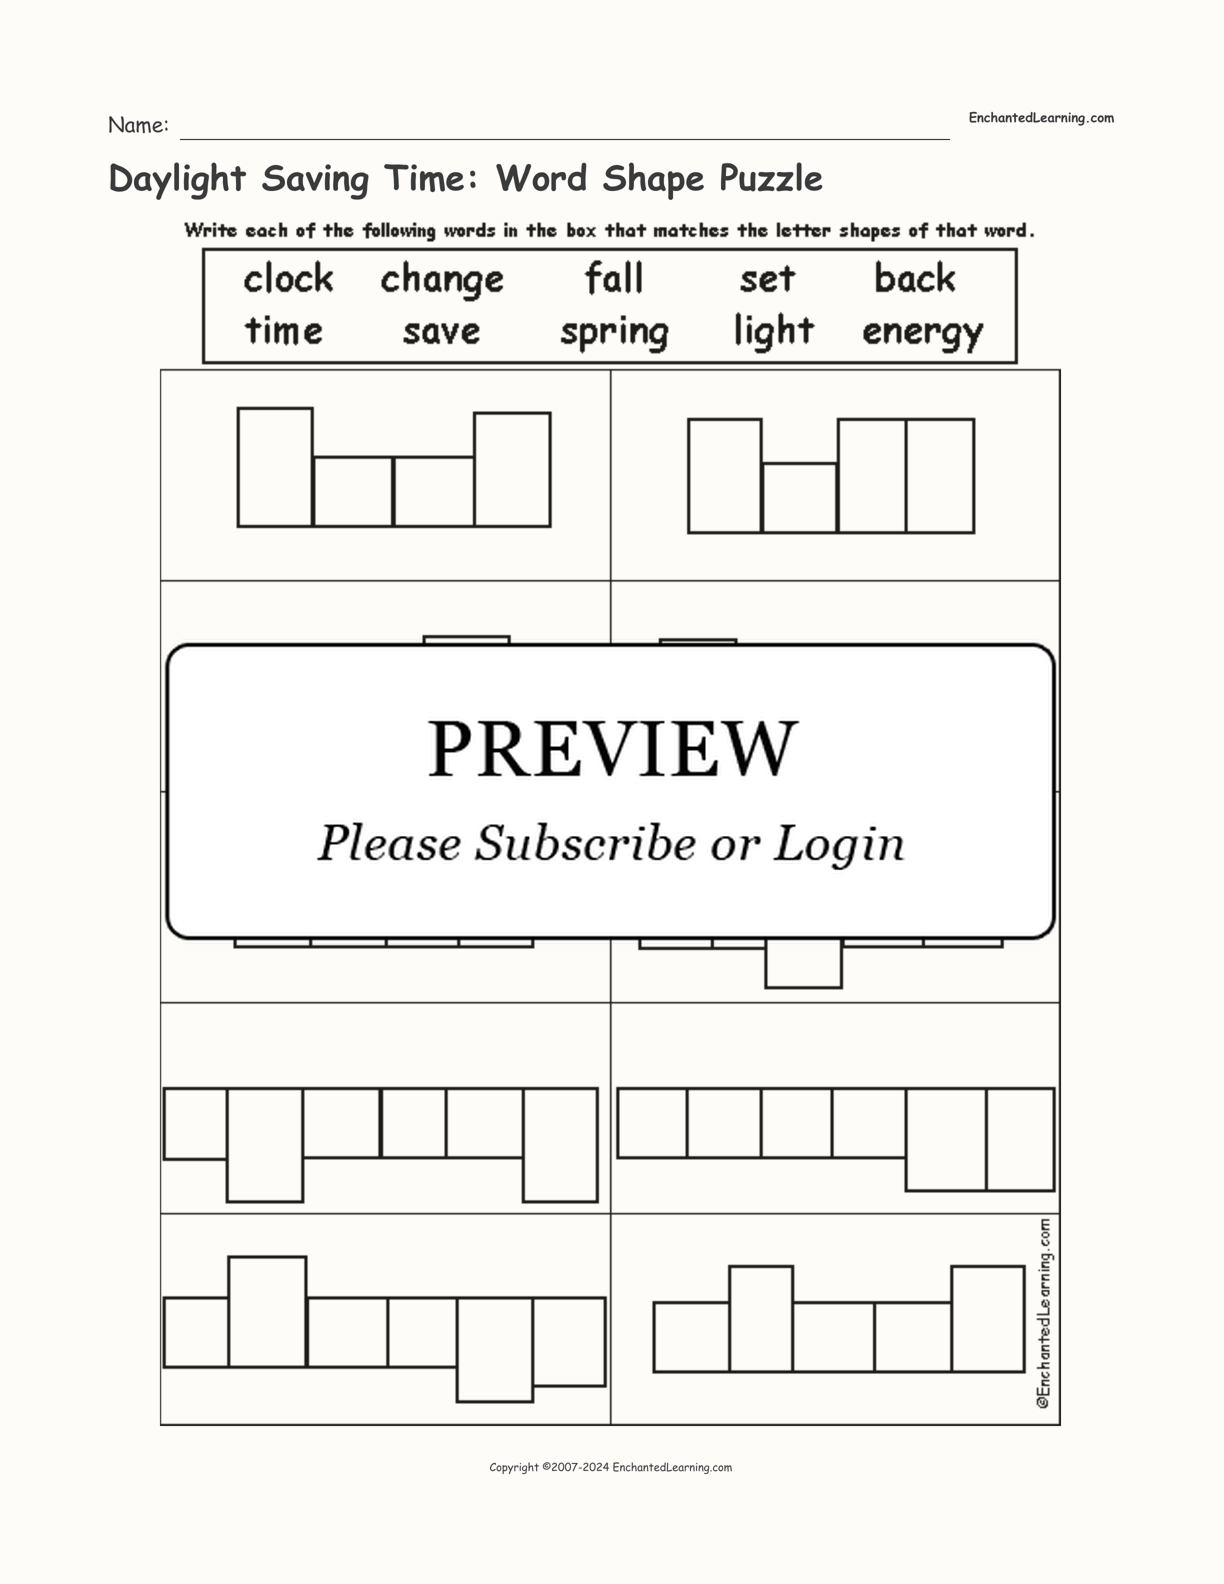 Daylight Saving Time: Word Shape Puzzle interactive worksheet page 1